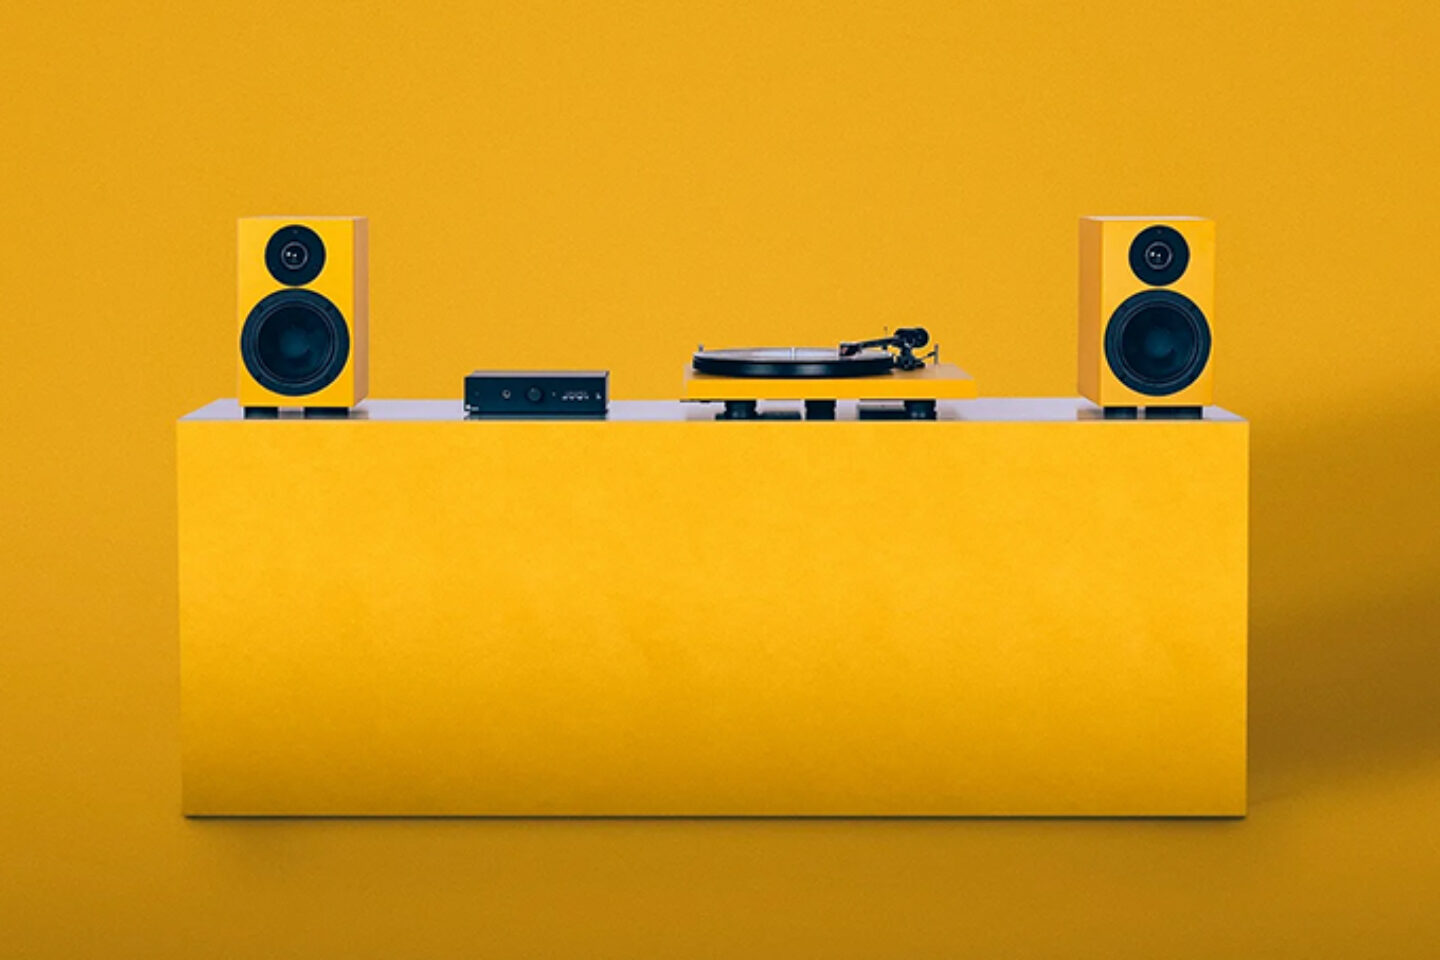 Pro-Ject's Colorful Audio System Is A Vibrant Home Stereo Upgrade